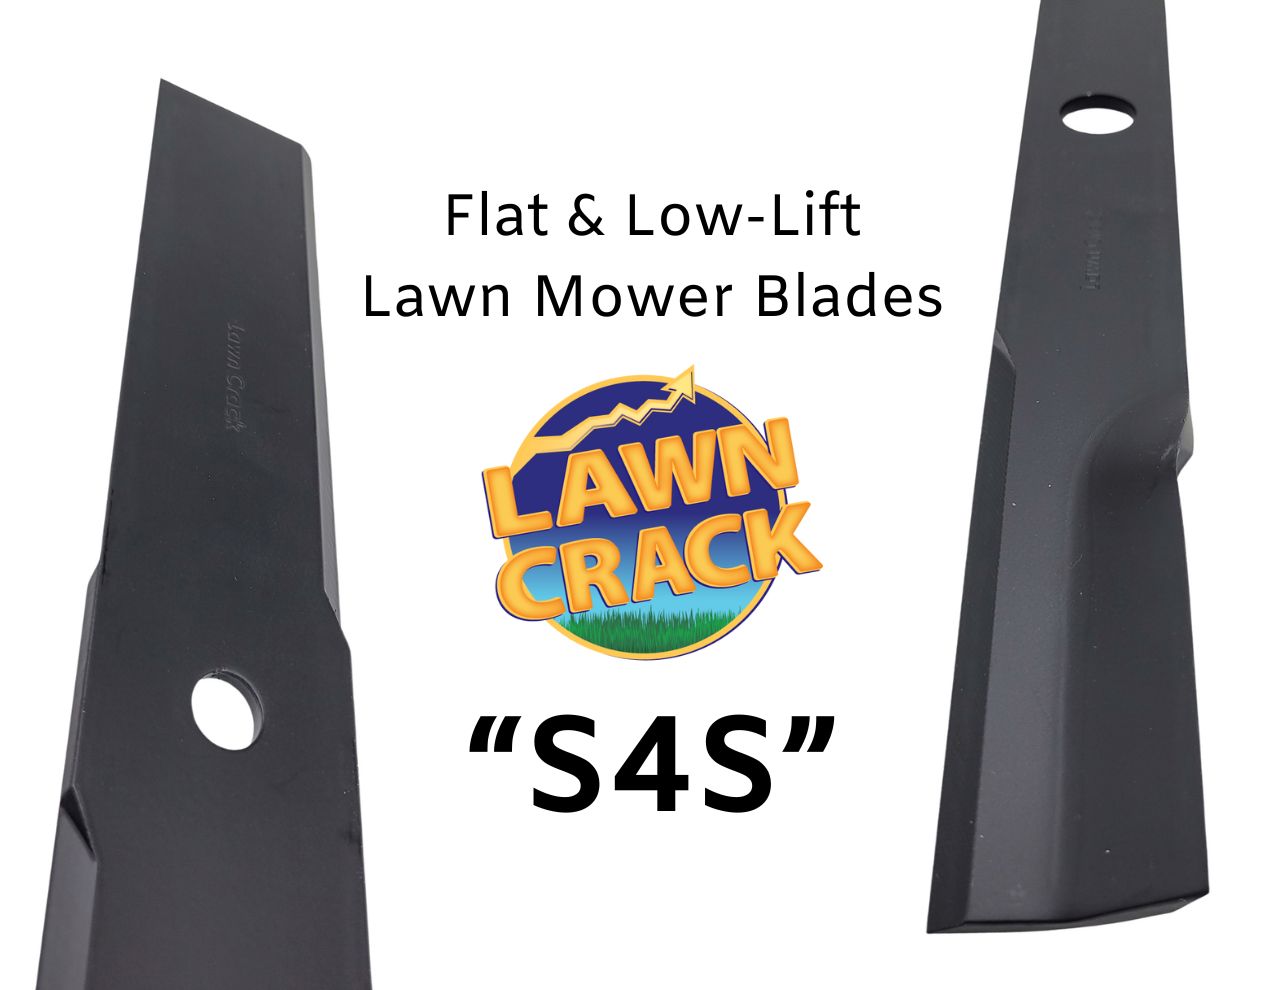 Flat & Low-Lift Lawn Mower Blades For Commercial Lawn Mowers